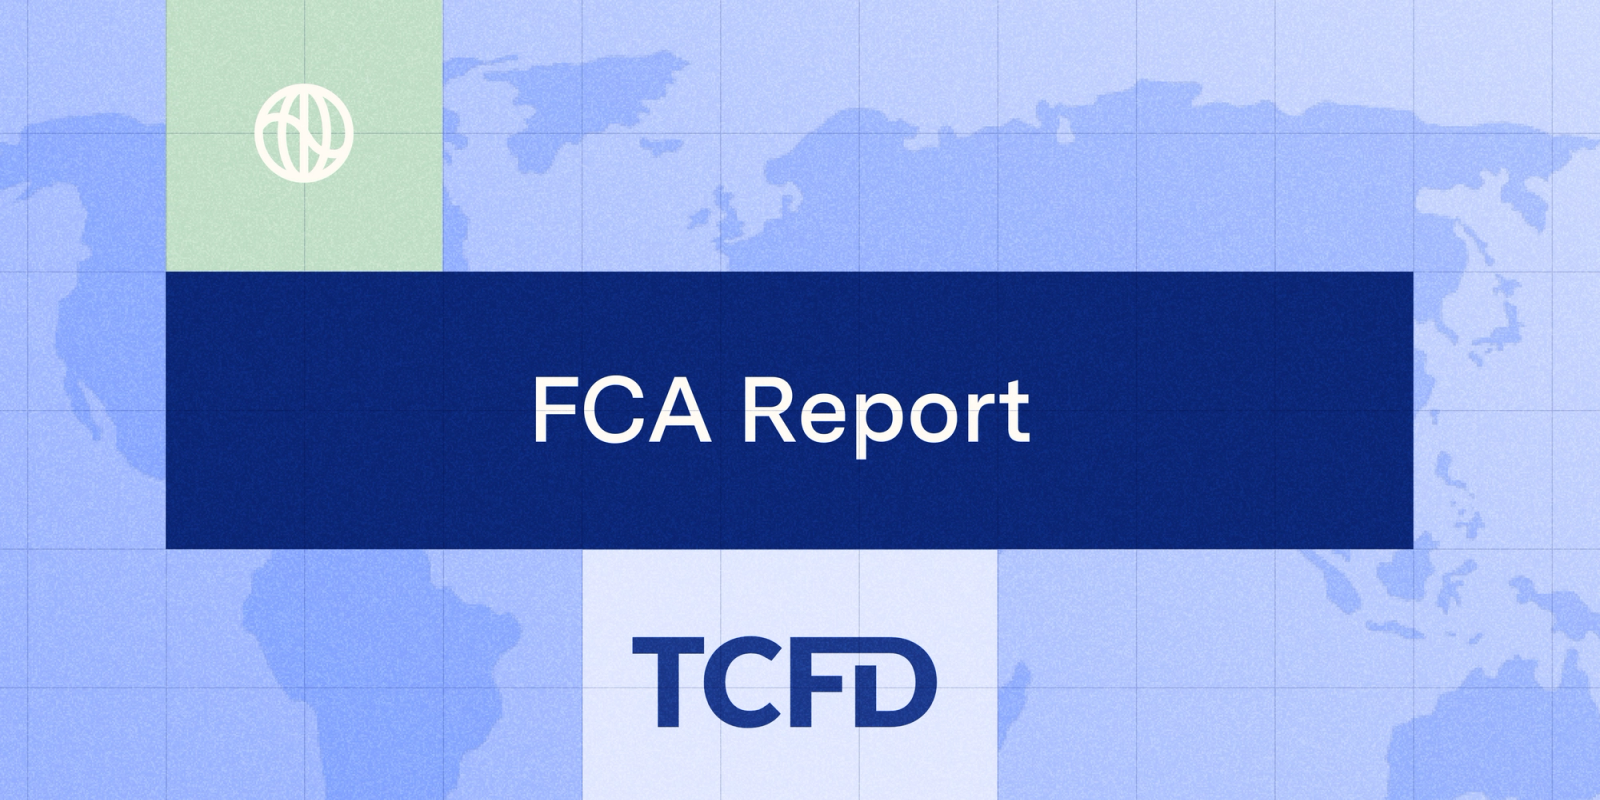 Image with TCFD logo and a main title "FCA report"